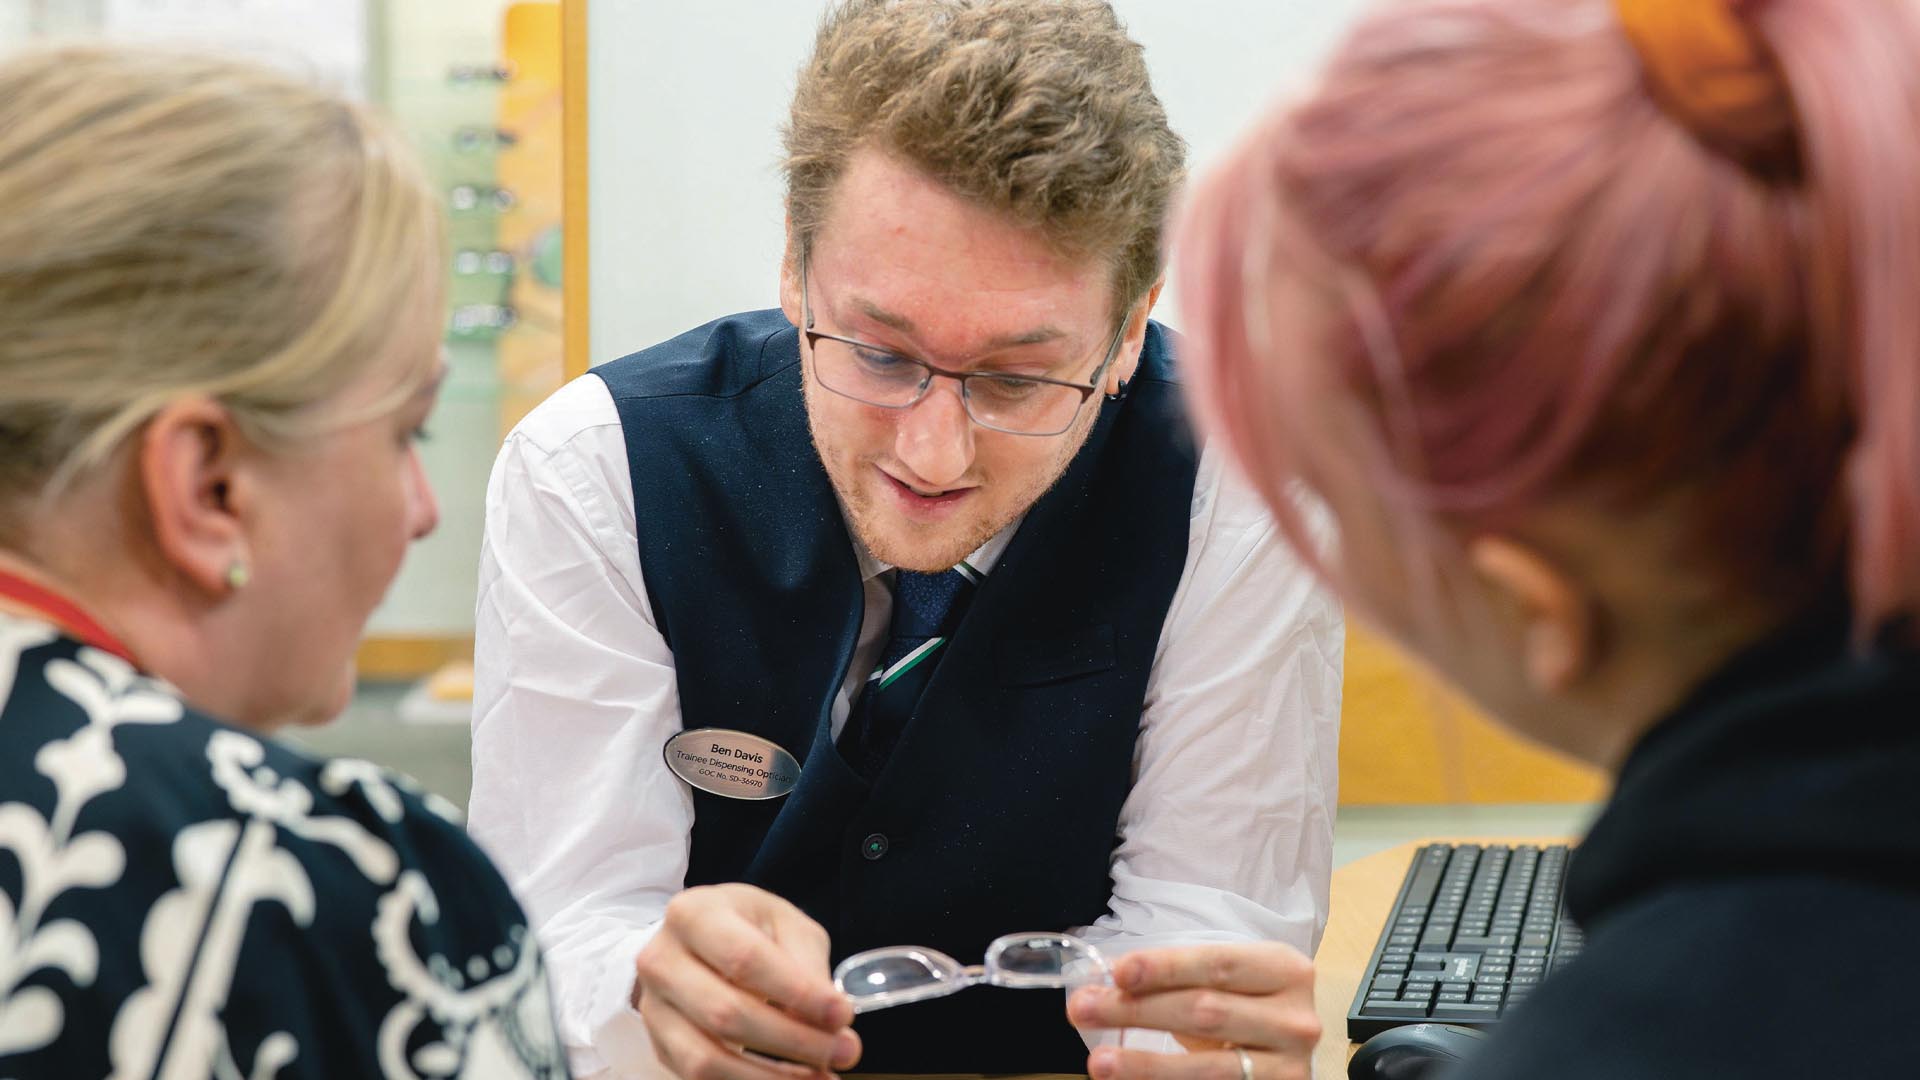 A member of the Specsavers team, male with blonde hair and glasses, looks at a pair of spectacles with his colleagues, both women, one young with pink hair, one older and blonde, wearing a blue and white patterned blouse.